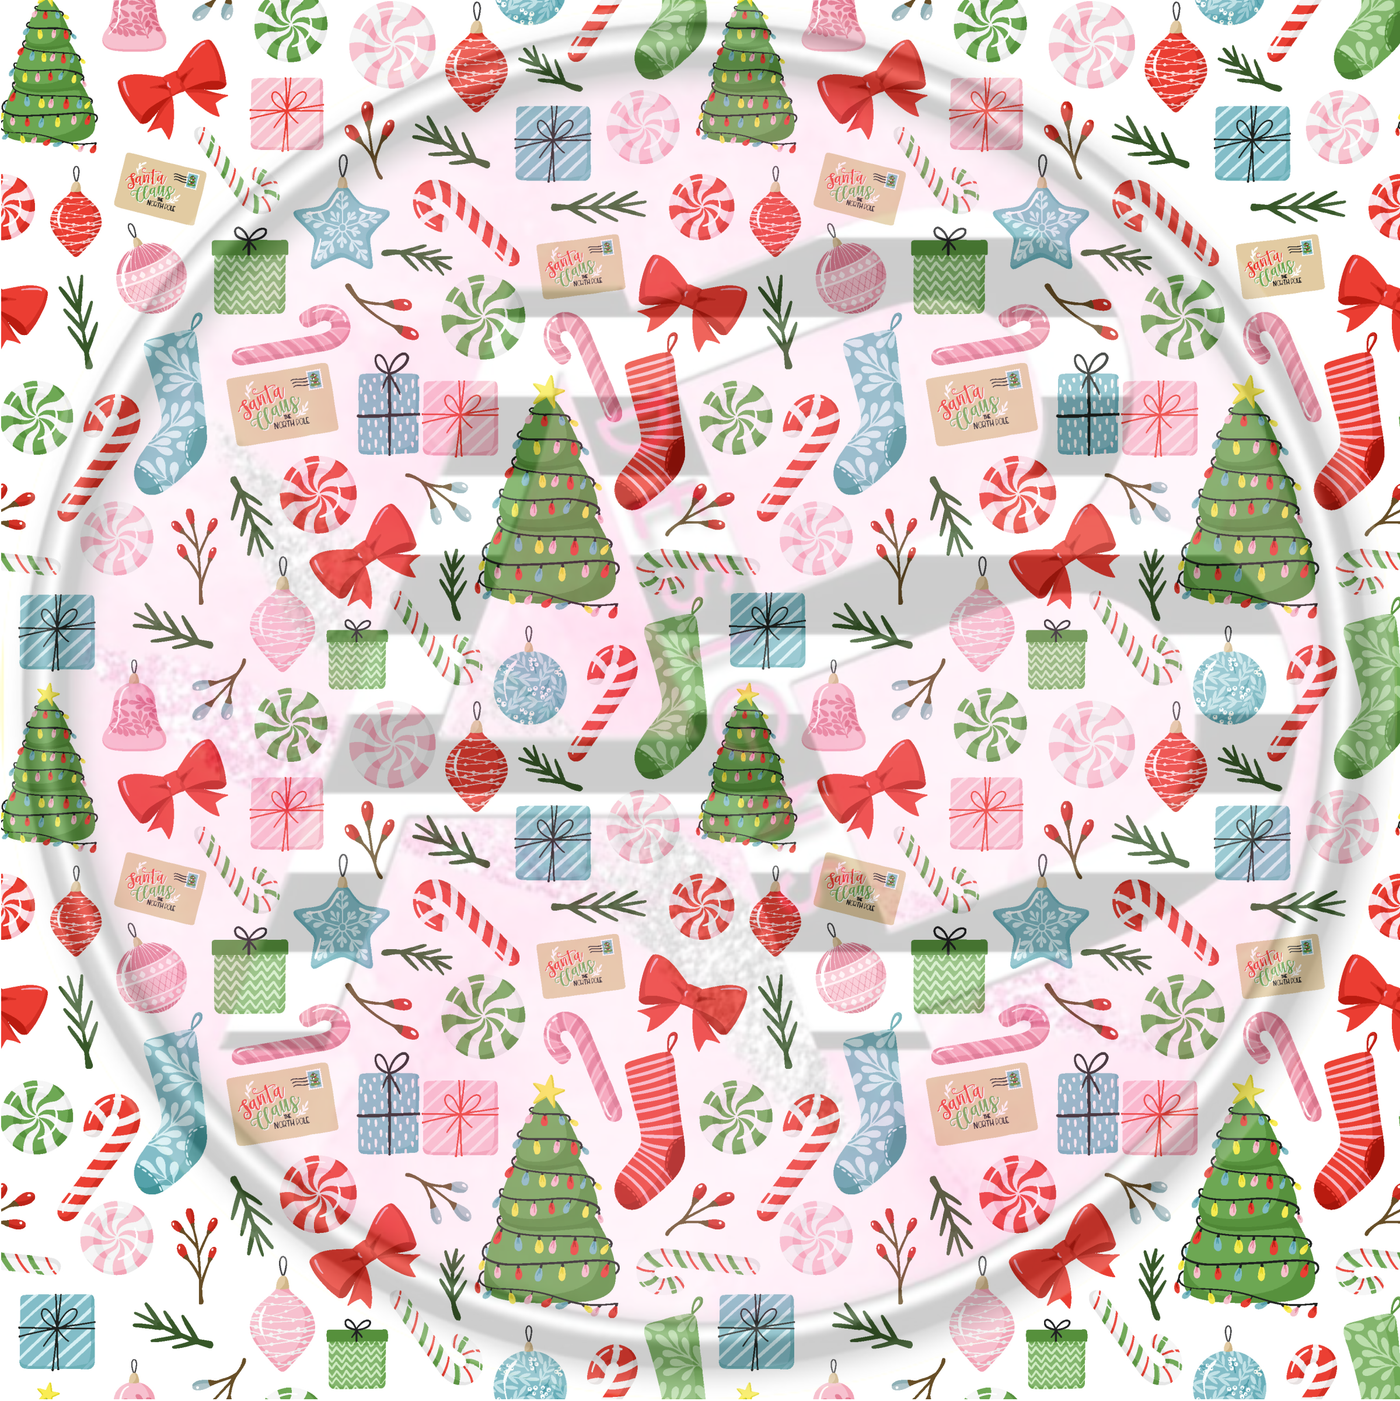 Adhesive Patterned Vinyl - Cozy Christmas 27